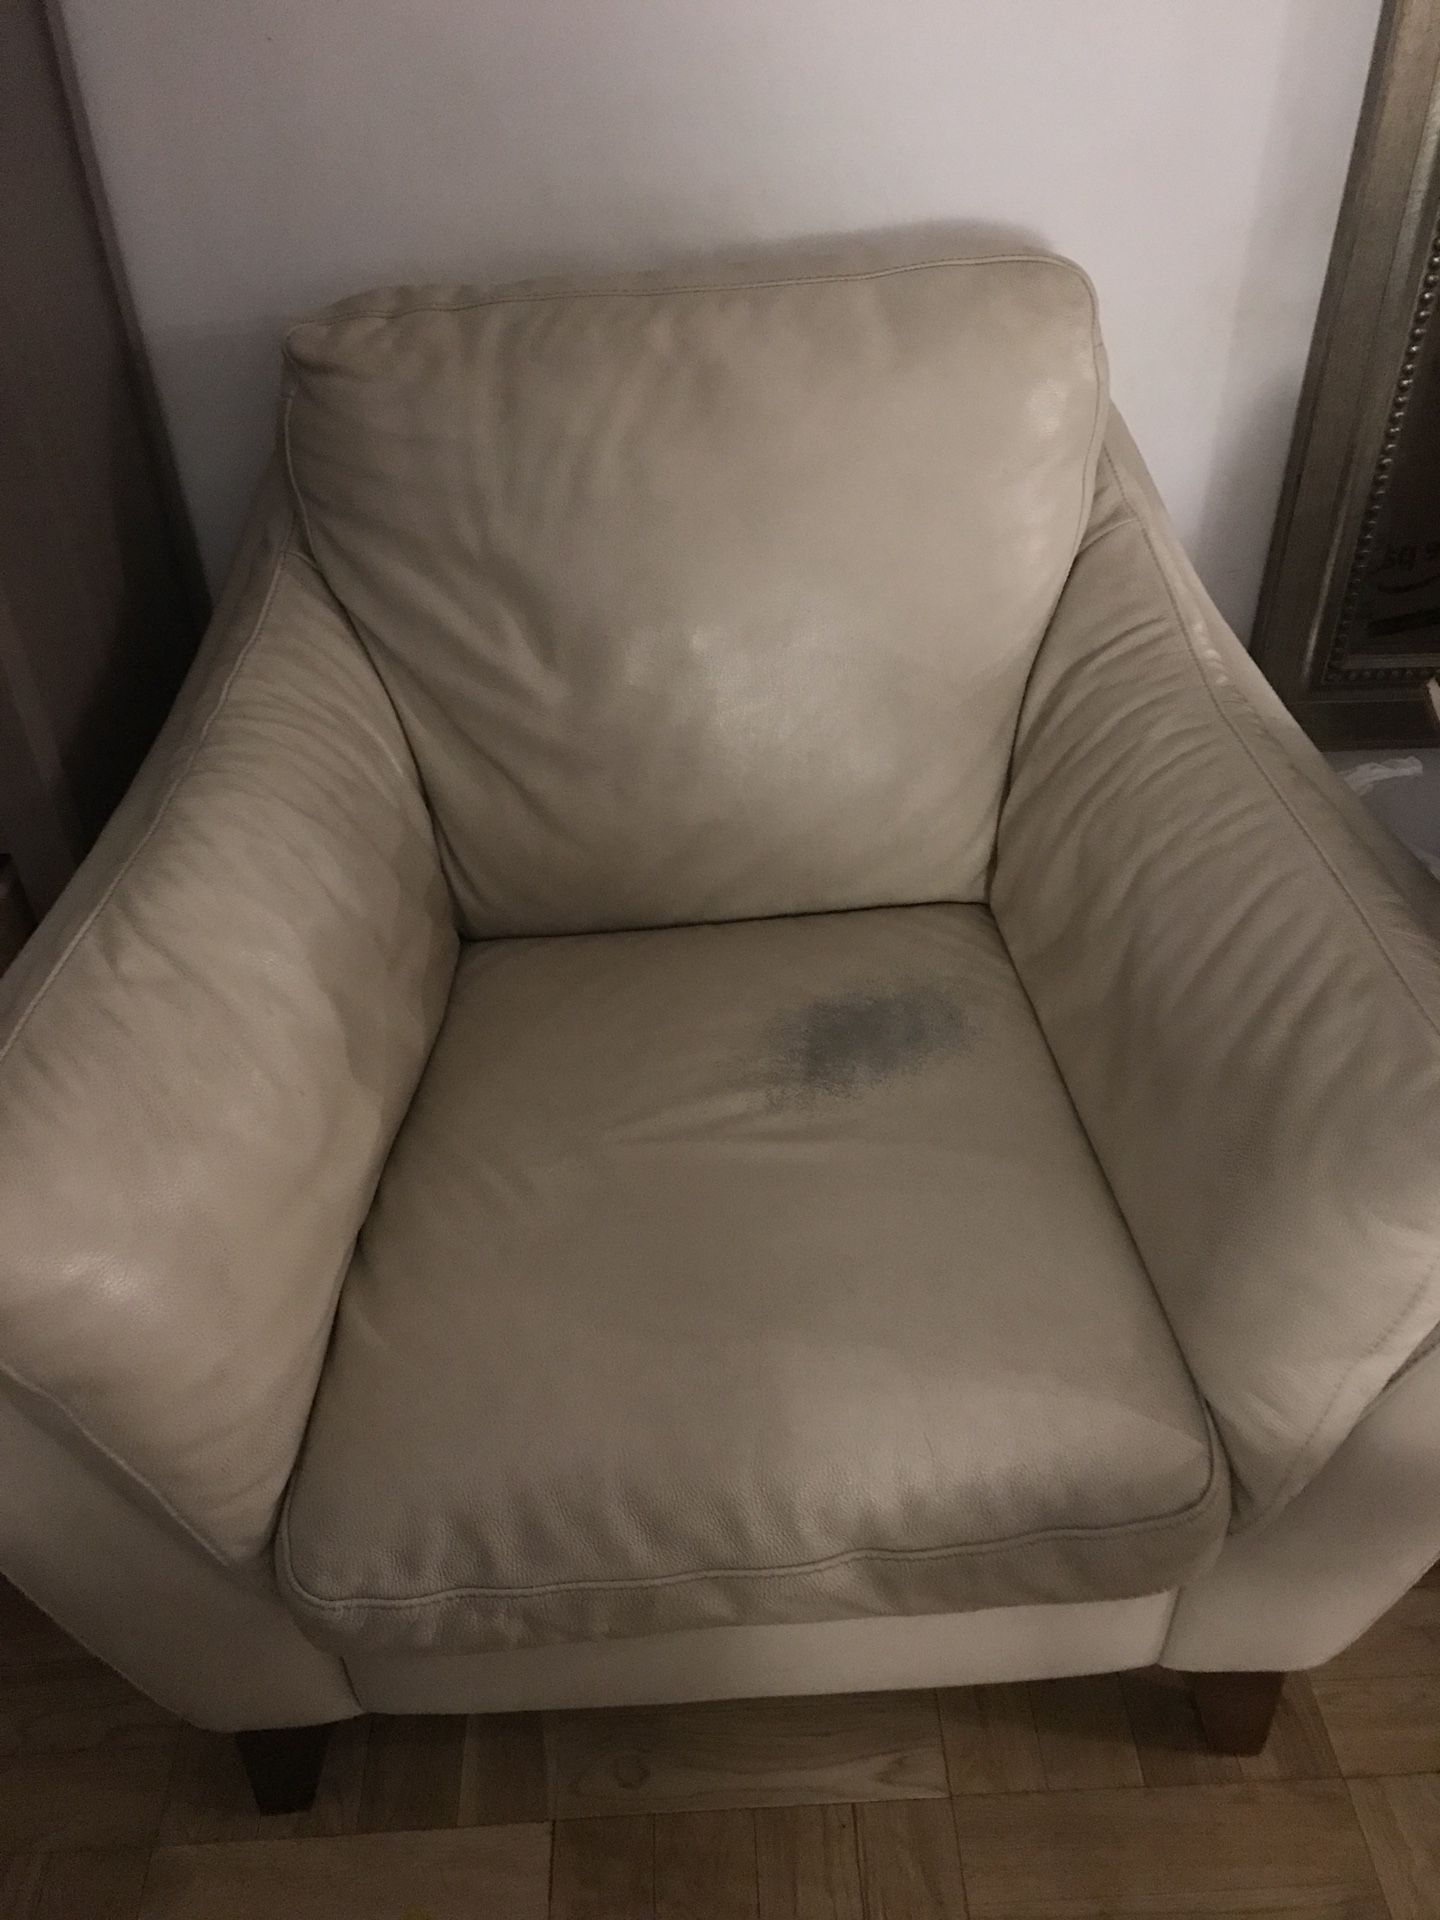 Free chair that needs some repair on the seat.